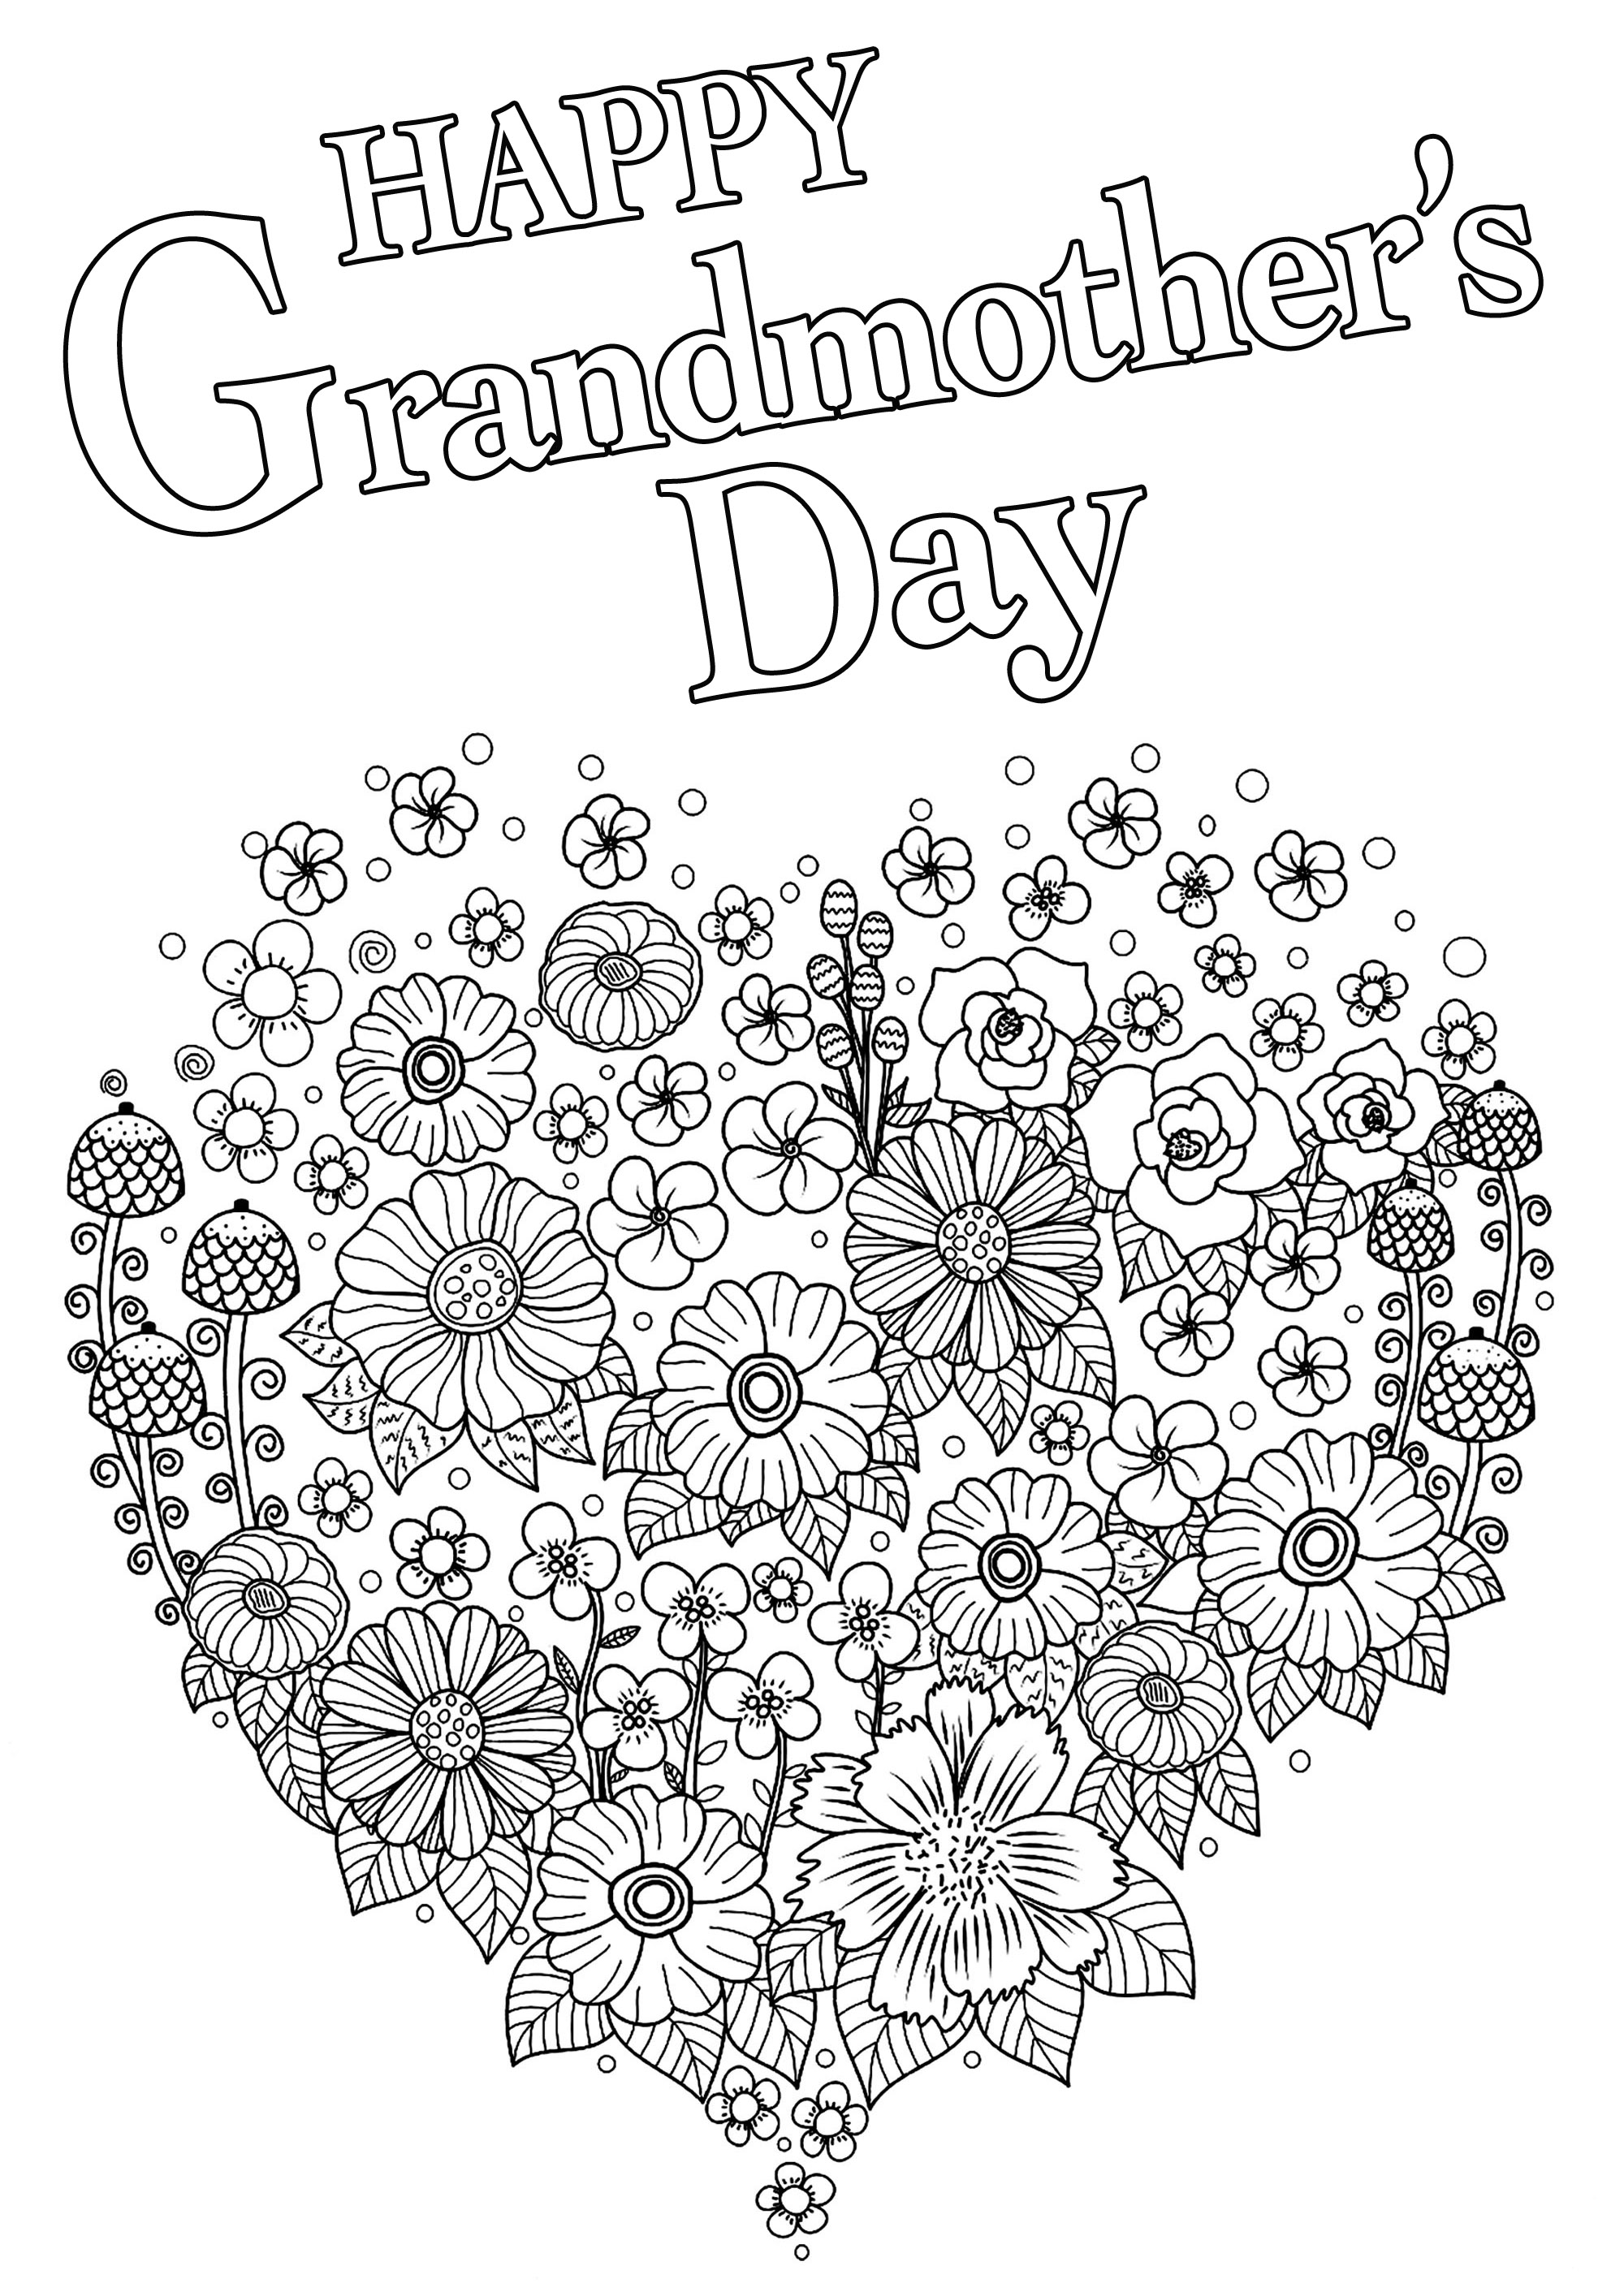 grandmother-s-day-coloring-pages